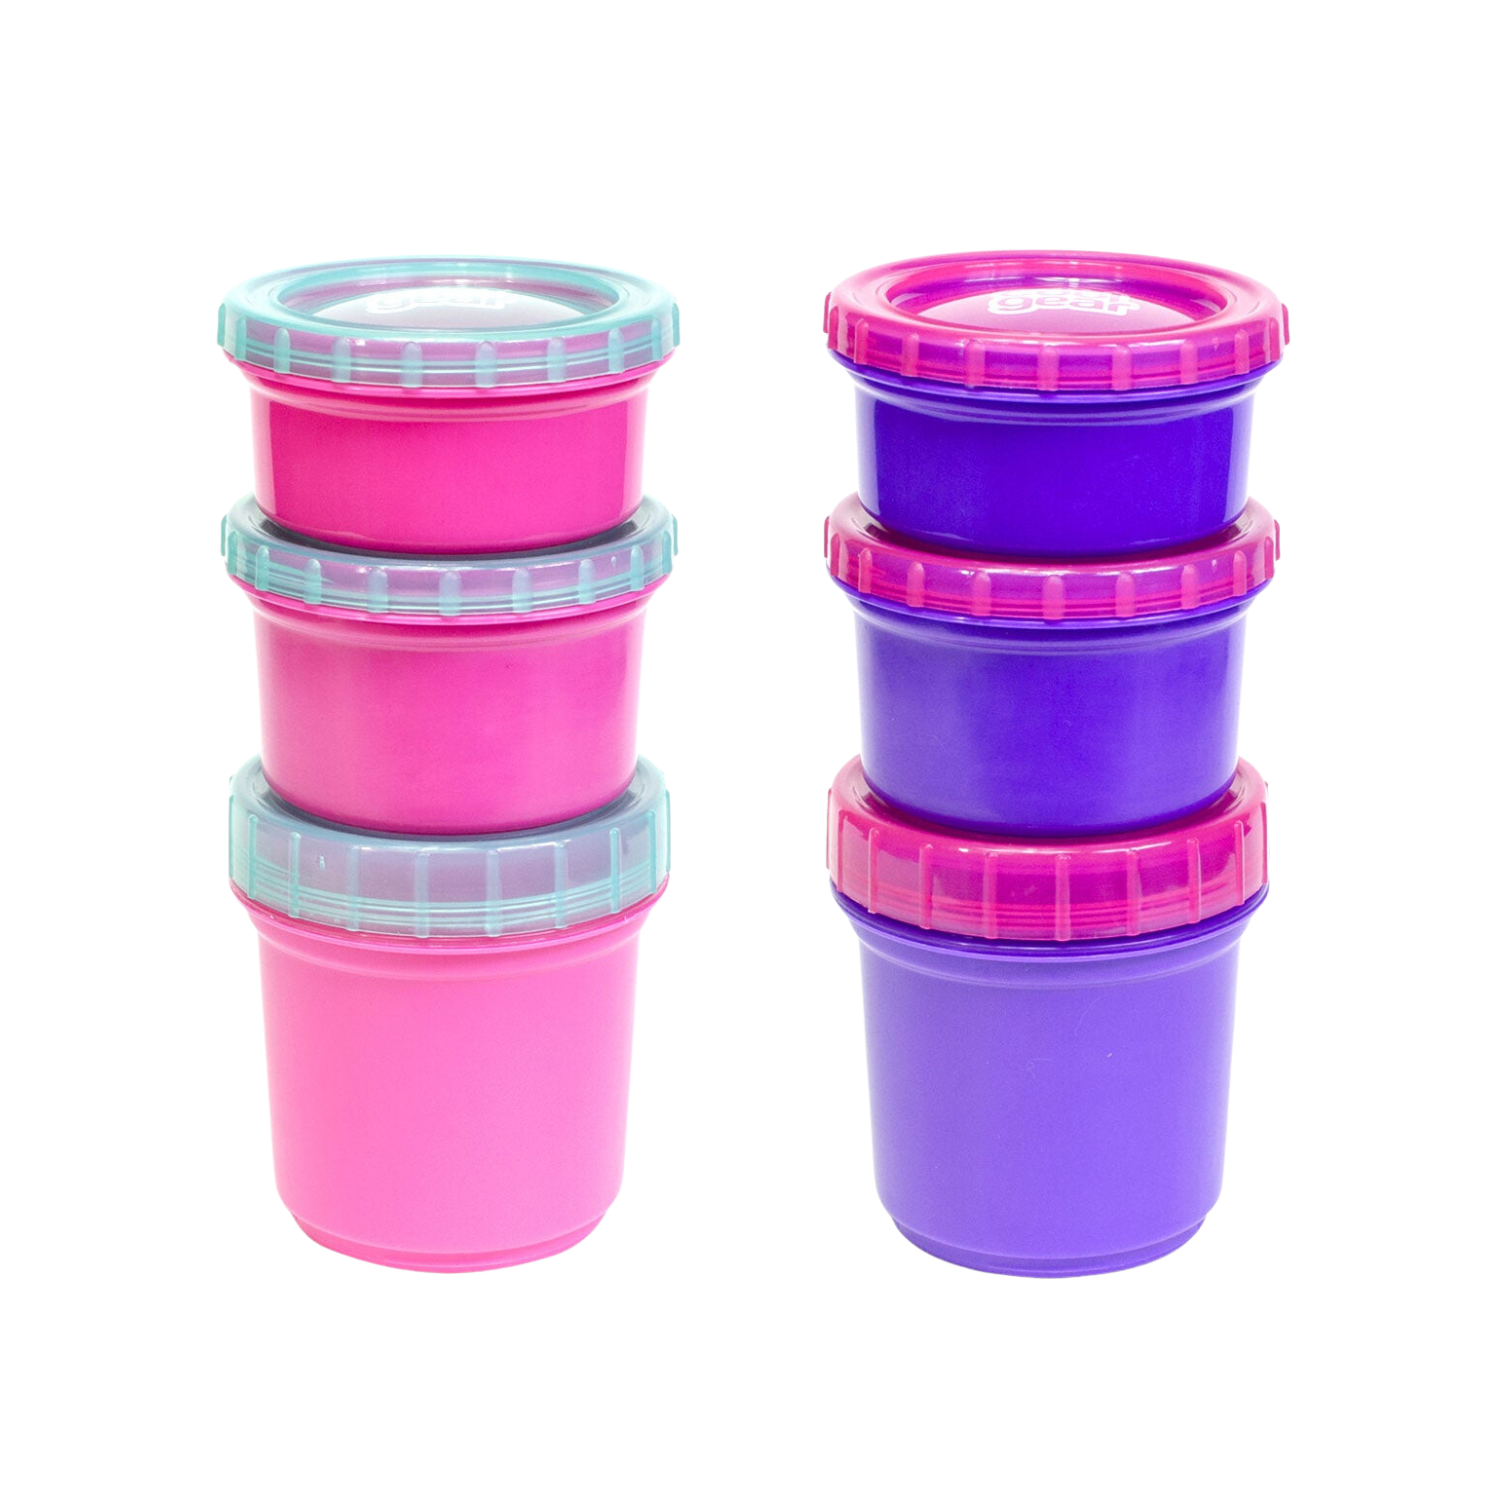 Cool Gear 2-Pack Kids Stackable Snack Snap Containers with Freezer Gel